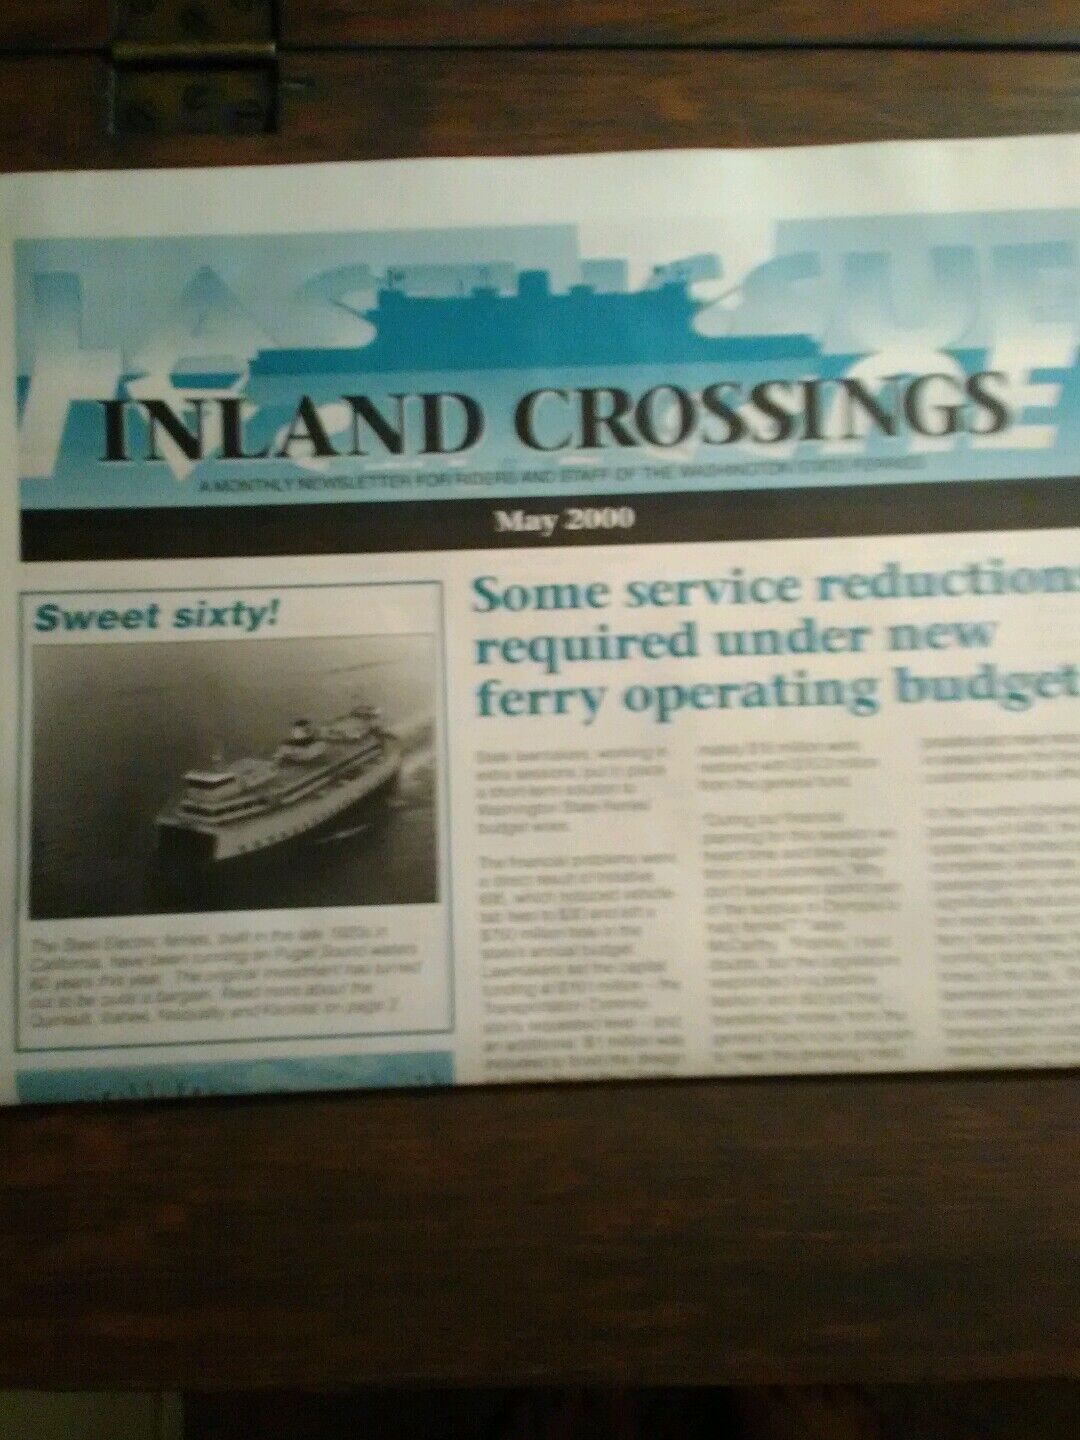 WASHINGTON  STATE FERRIES INLAND CROSSINGS  MONTHLY NEWSLETTER  MAY 2000